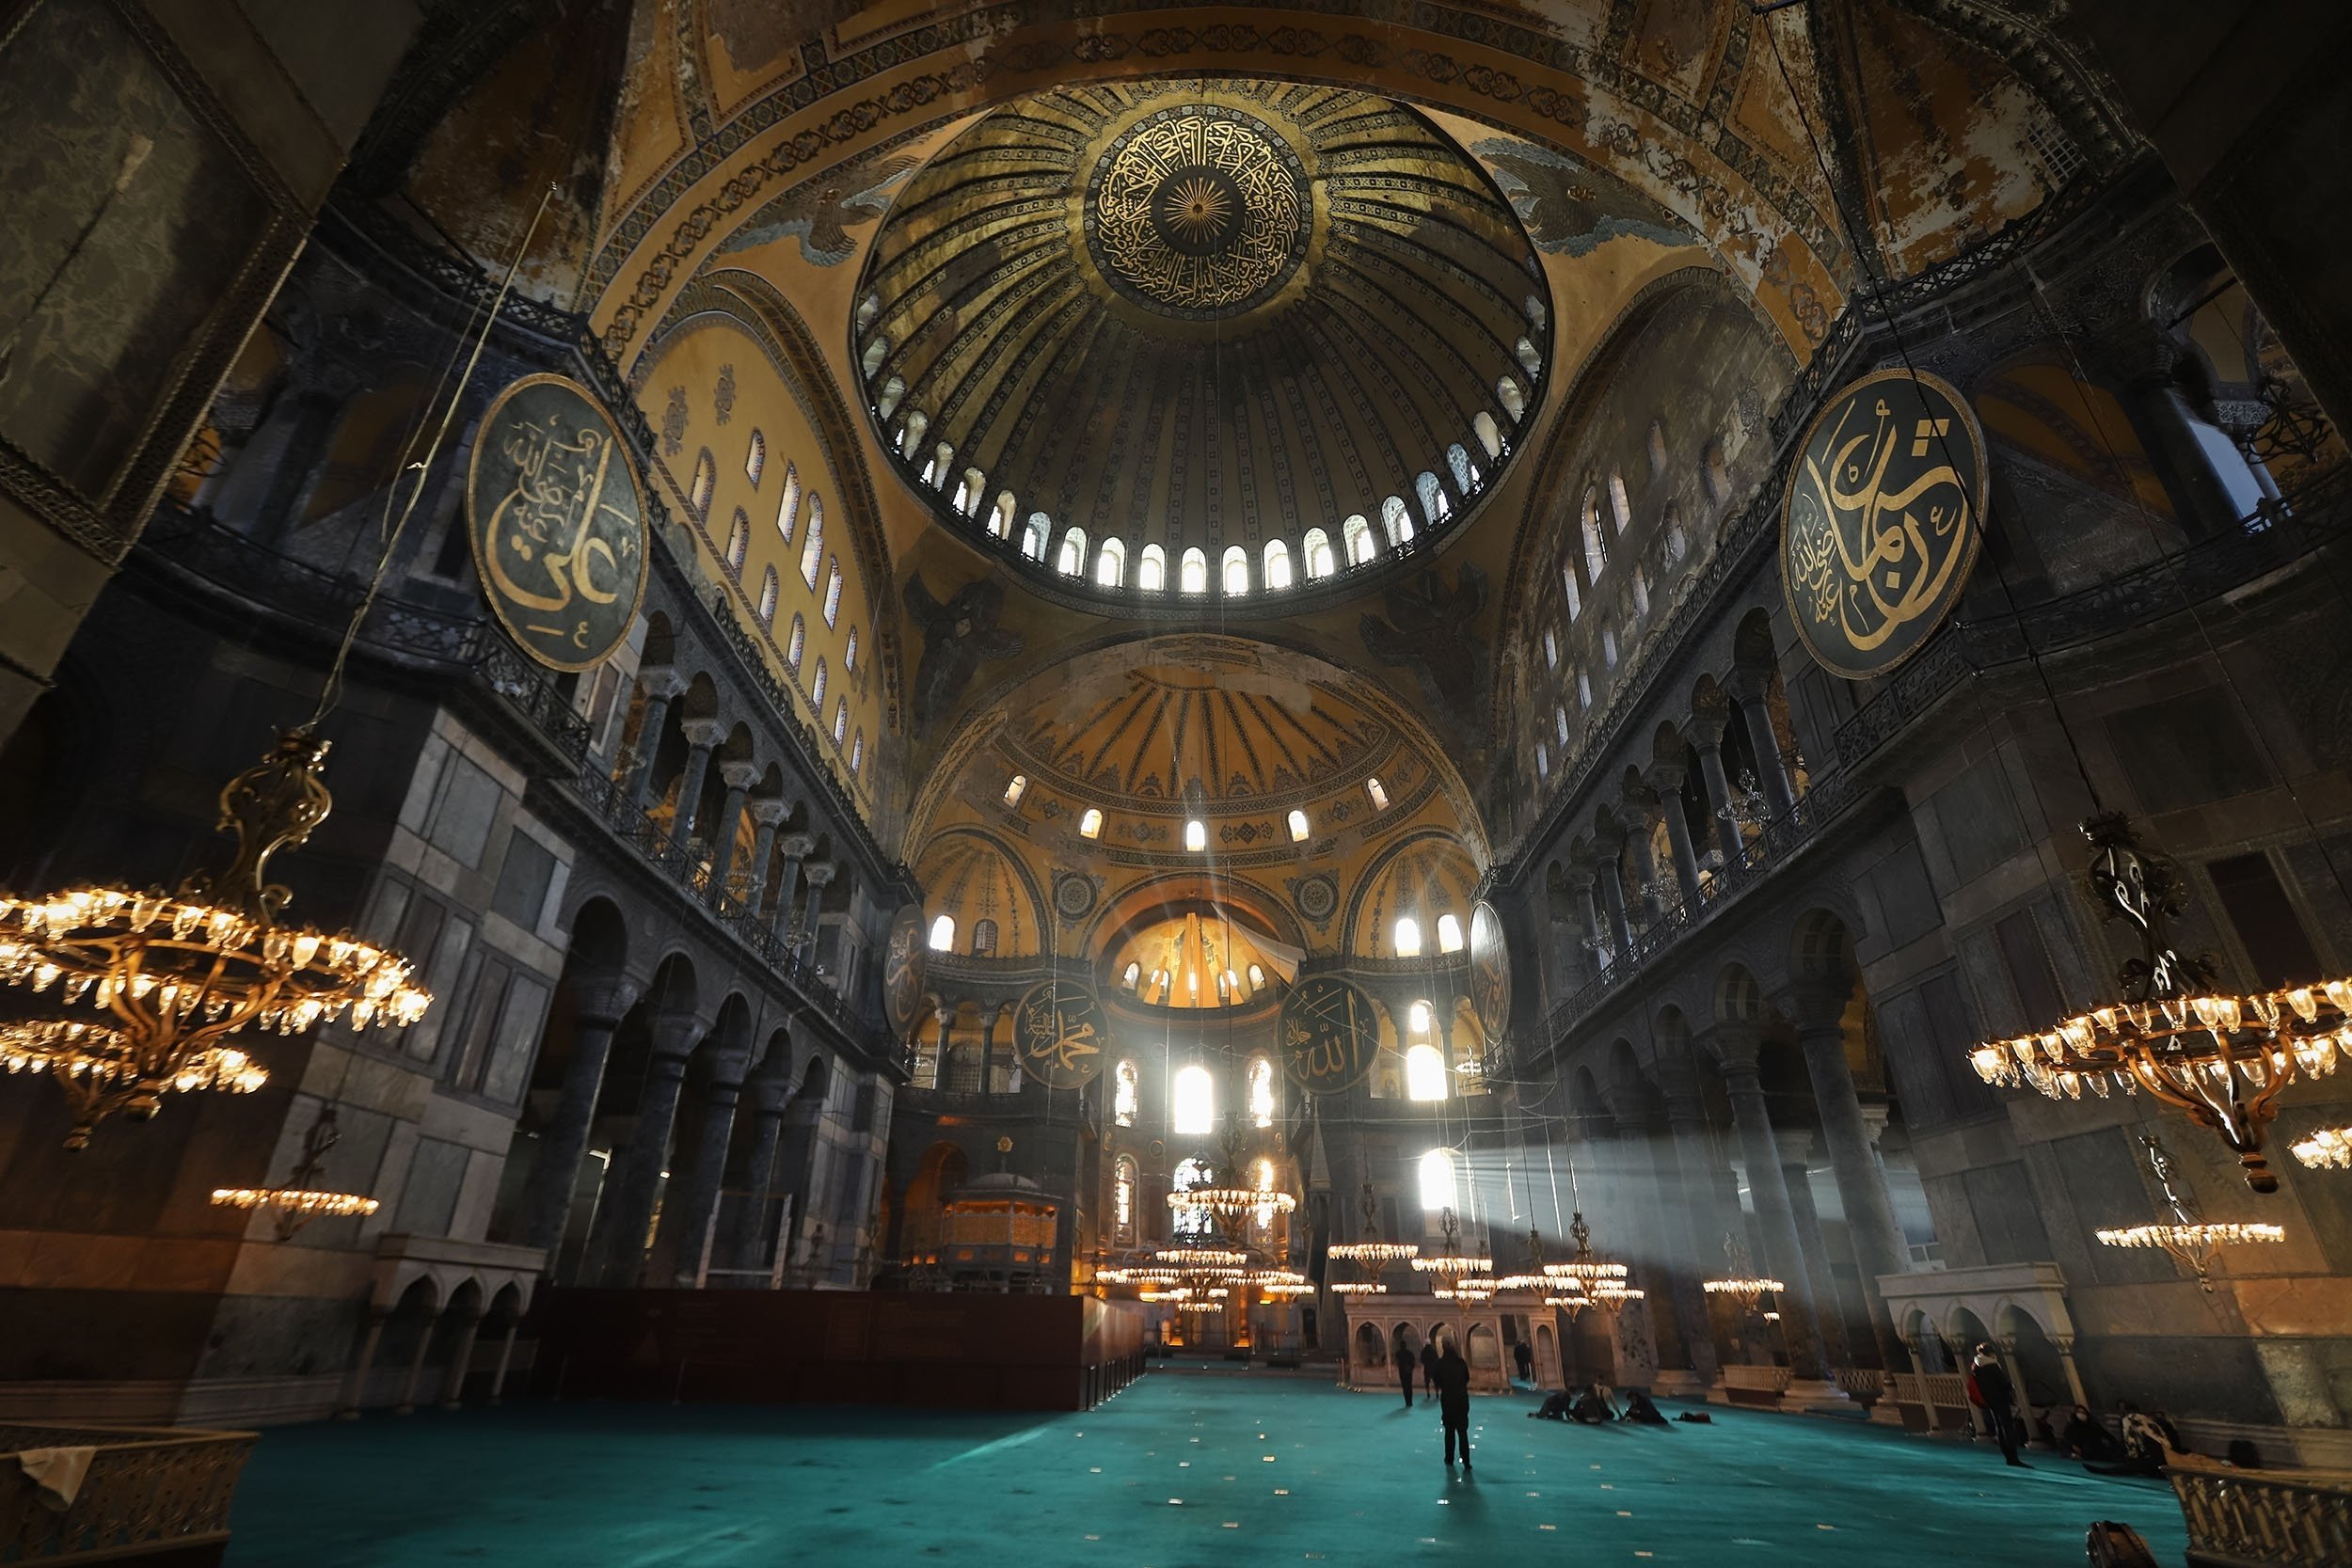 An interior view of the Hagia Sophia Grand Mosque in Sultanahmet, Istanbul, Turkey. (Shutterstock Photo)